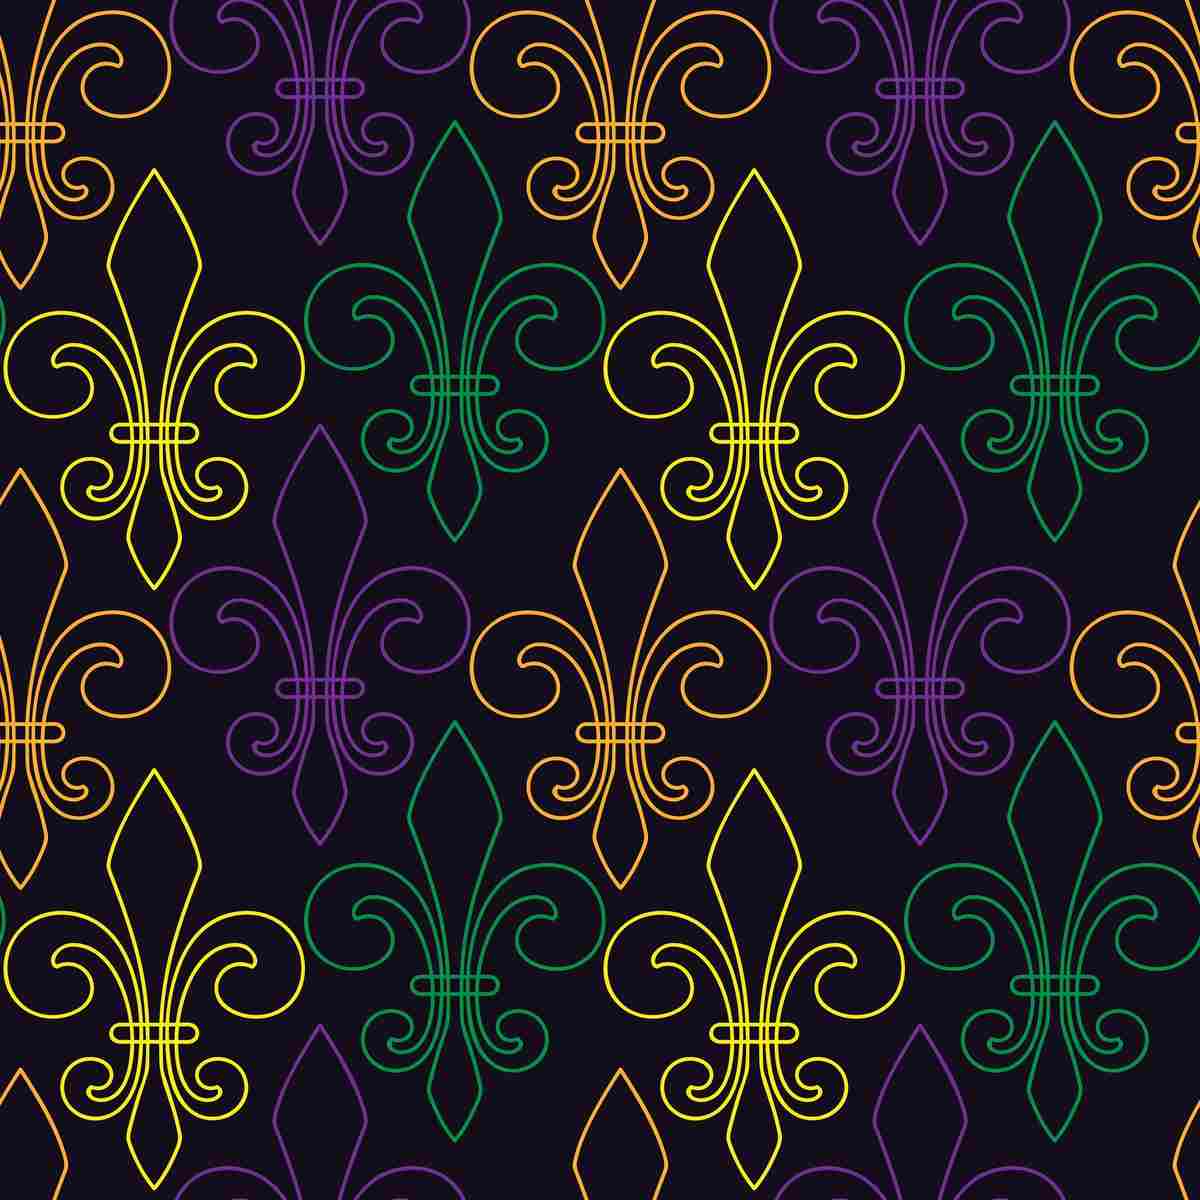 Green, gold and purple images of the fleur de lis repeating across a black background for Mardi Gras.